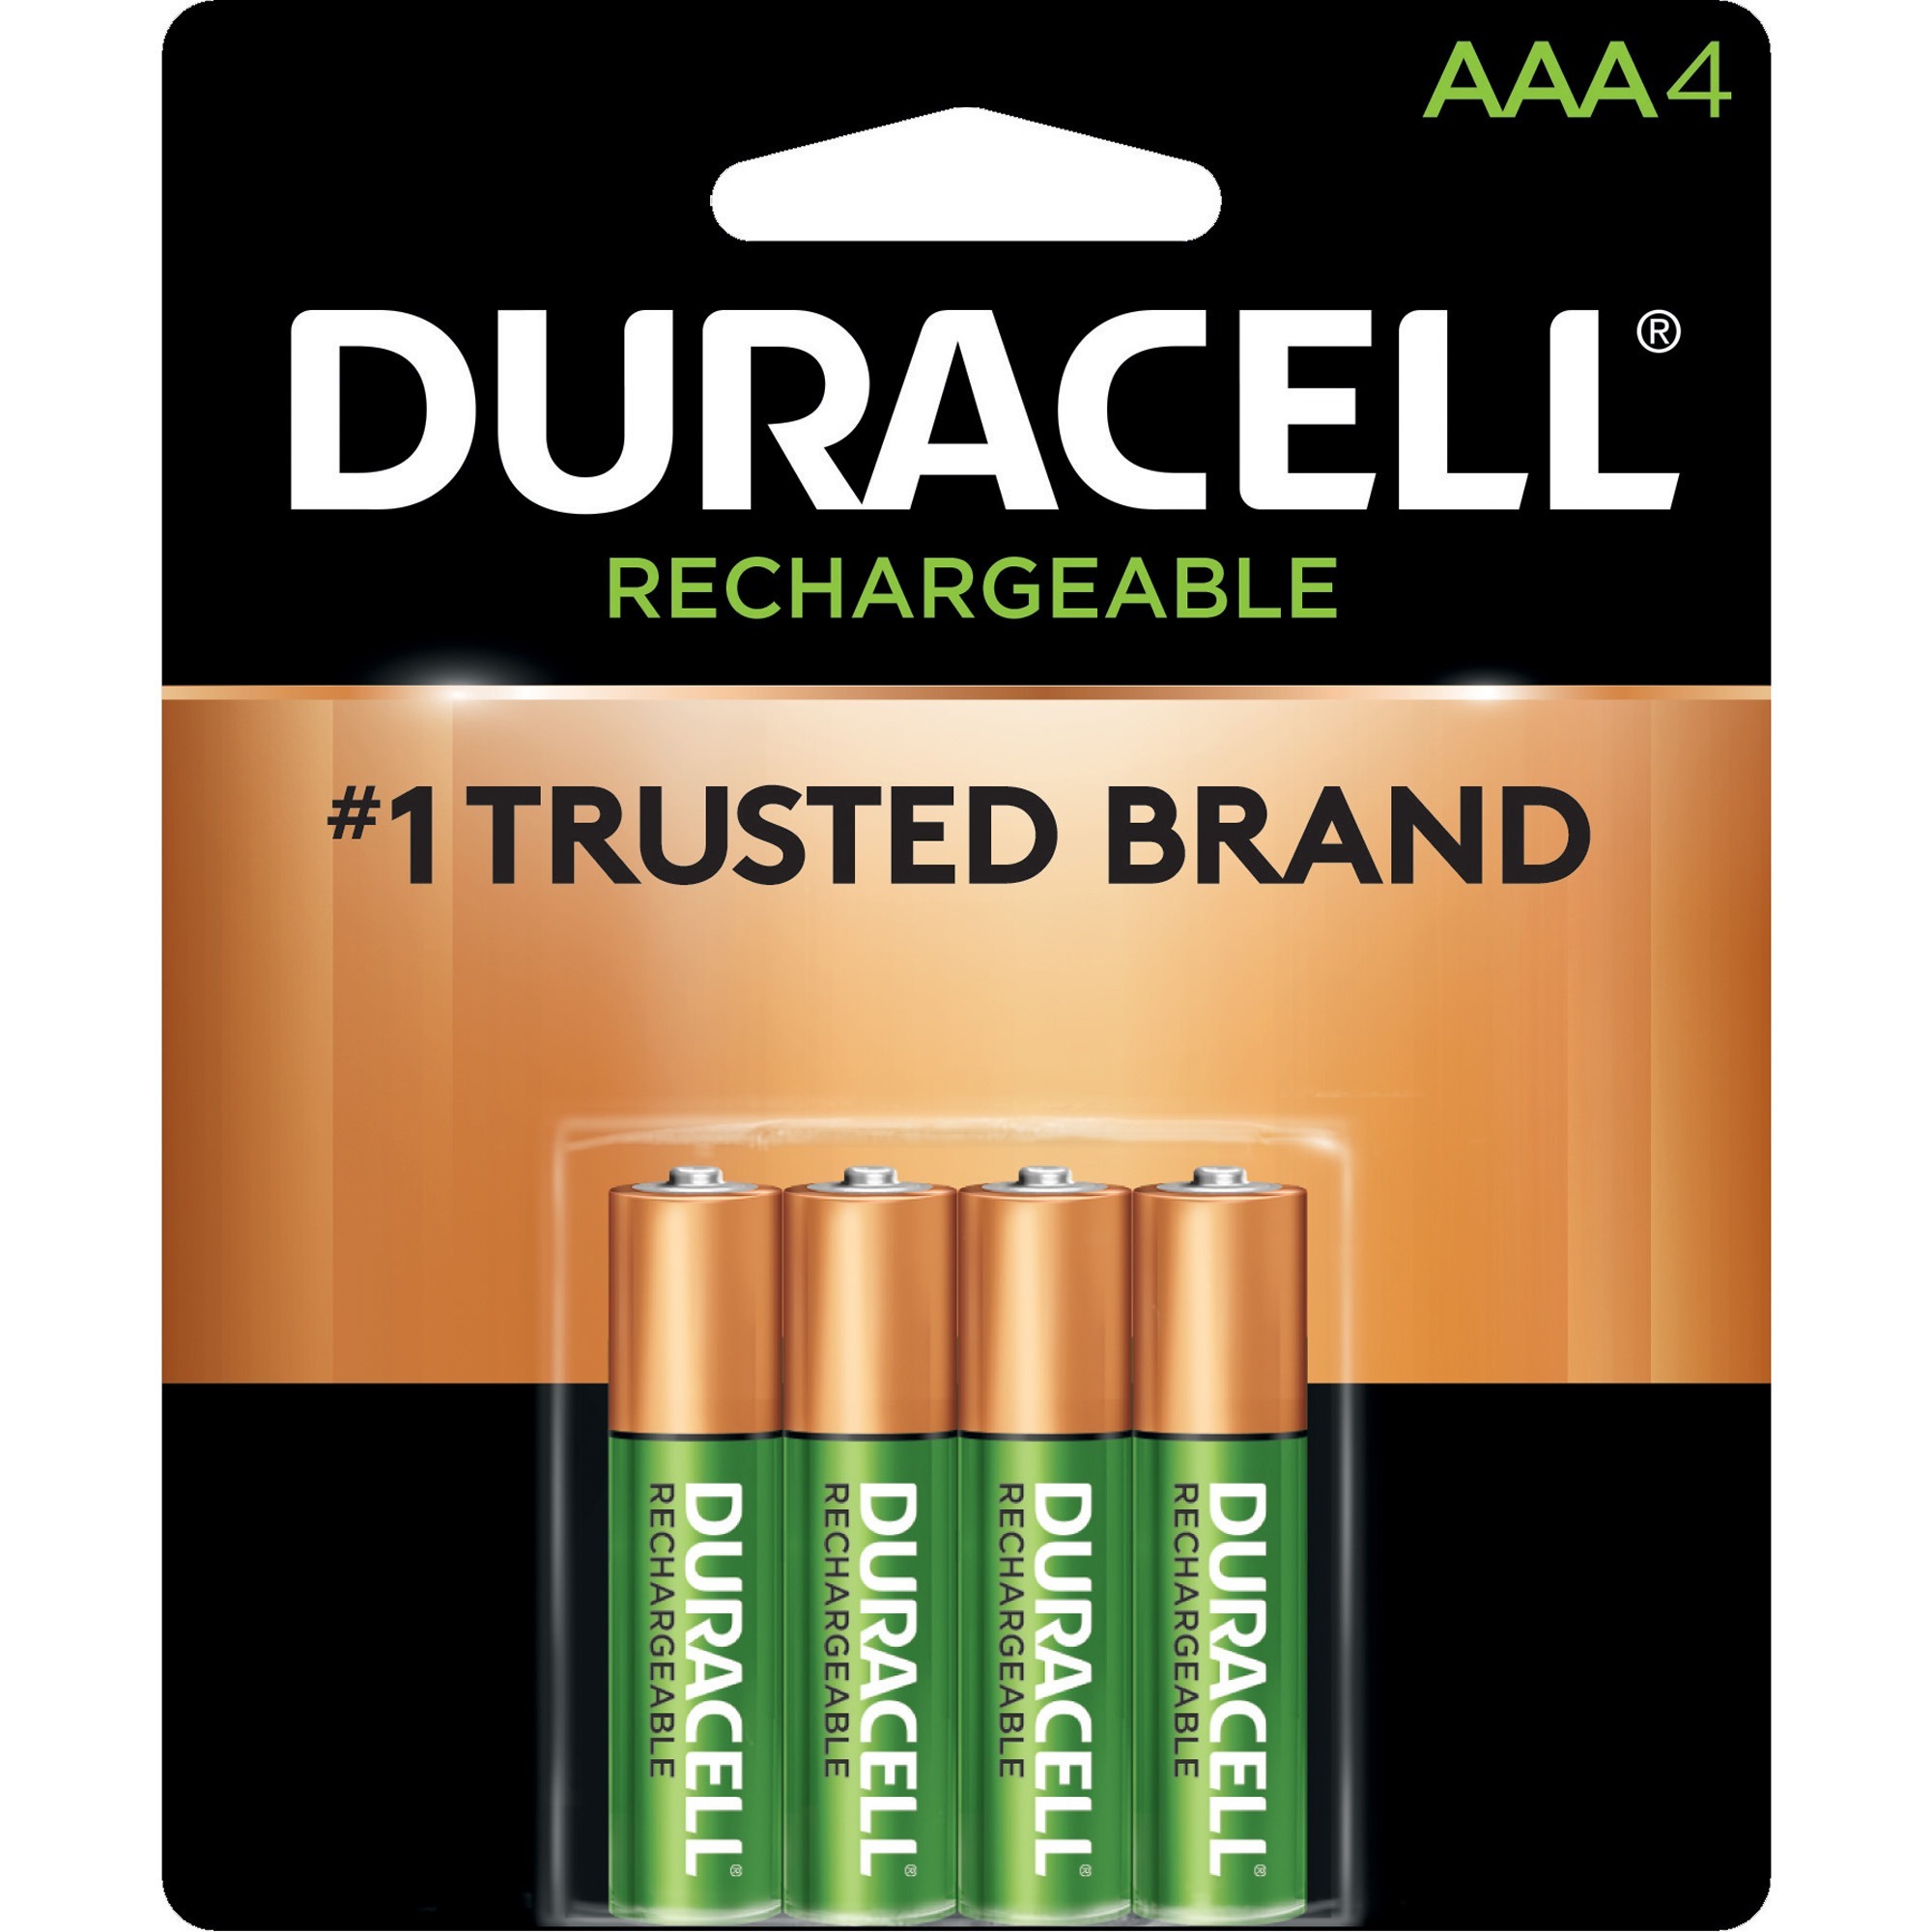 Duracell DX2400 General Purpose Rechargeable AAA Batteries - 4/Pack